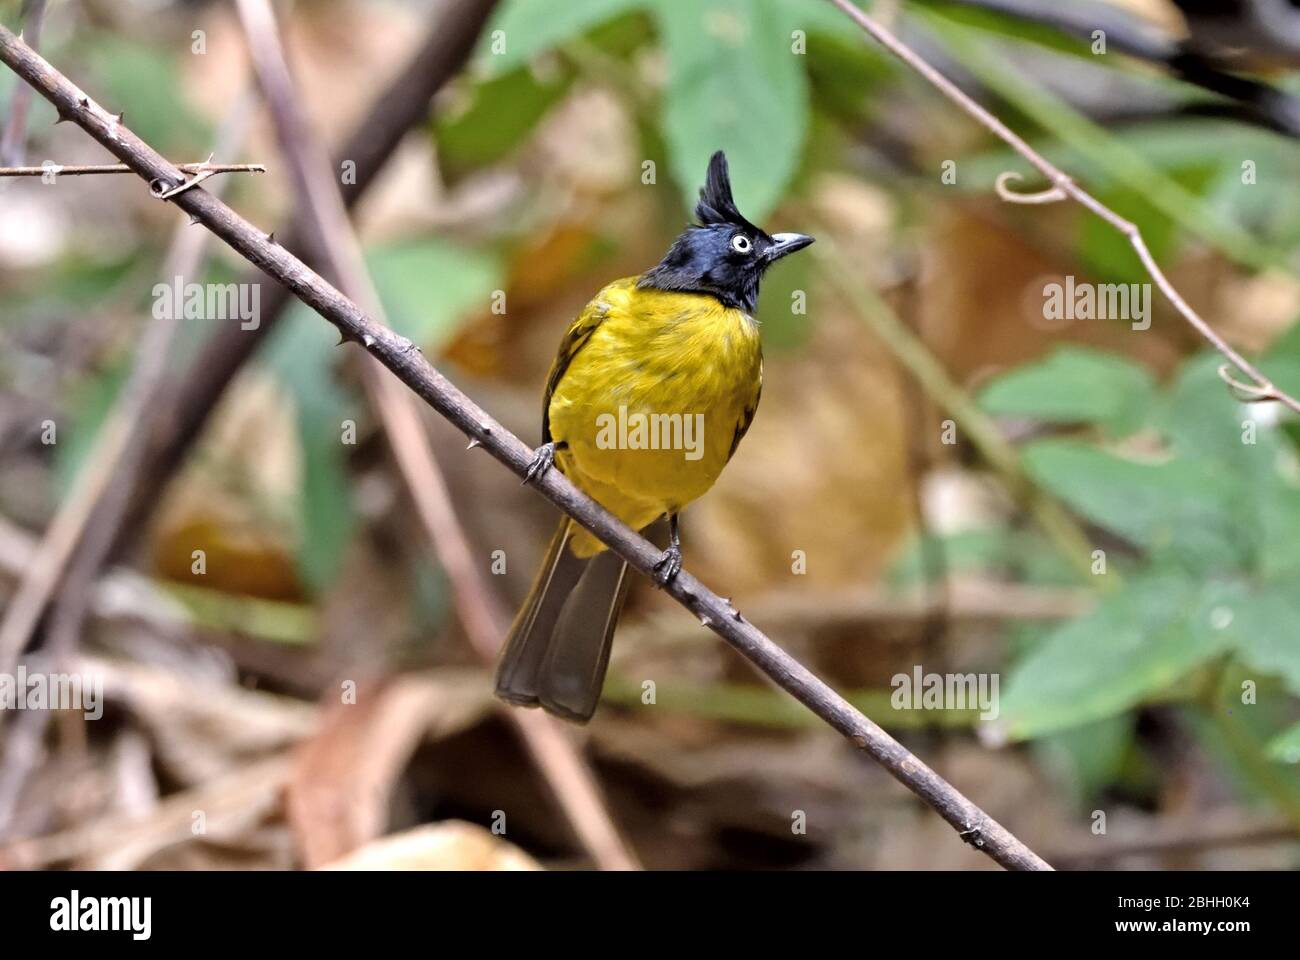 A Black-crested Bulbul (Pycnontus flaviventris) perched on a small branch in the forest in North Eastern Thailand Stock Photo